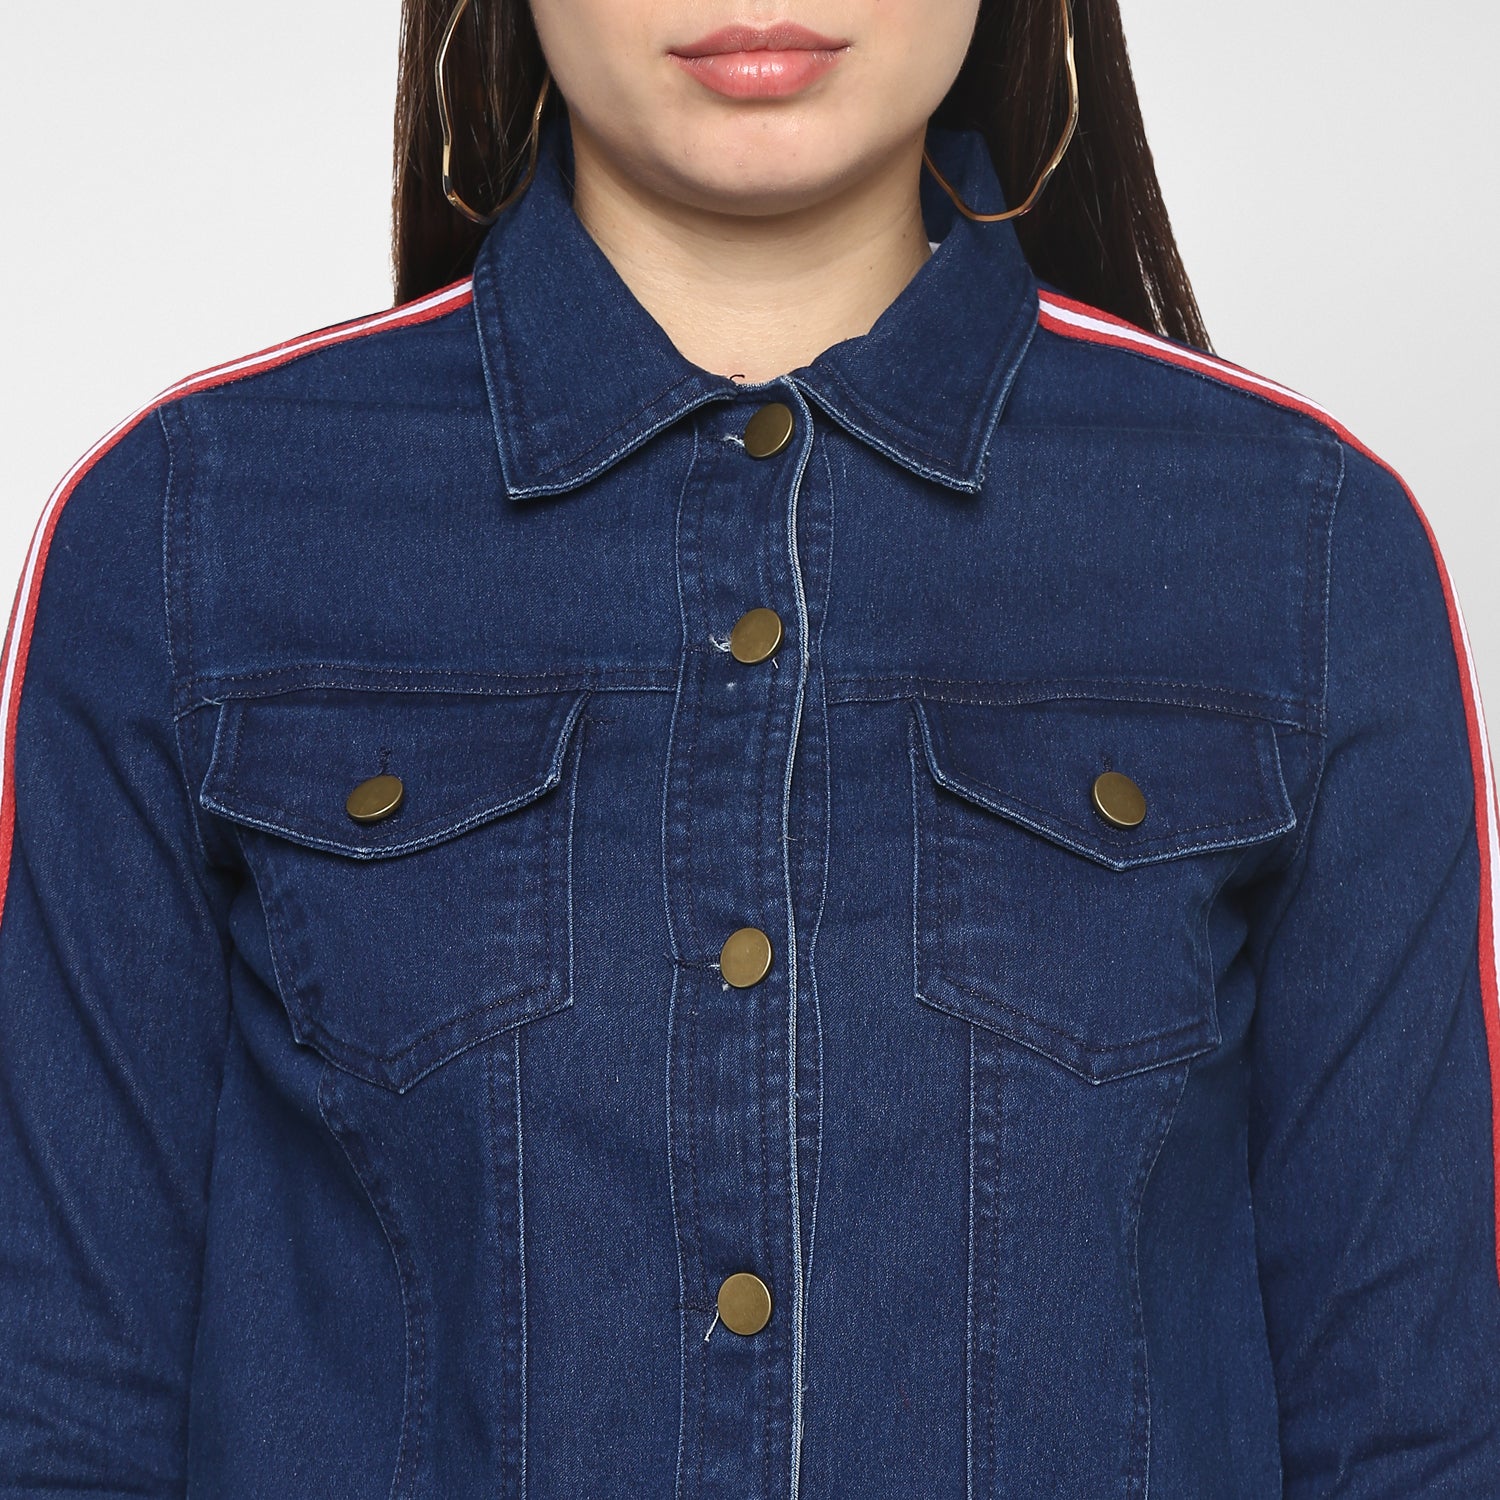 Women's Navy Blue Jacket with Red Tape - StyleStone